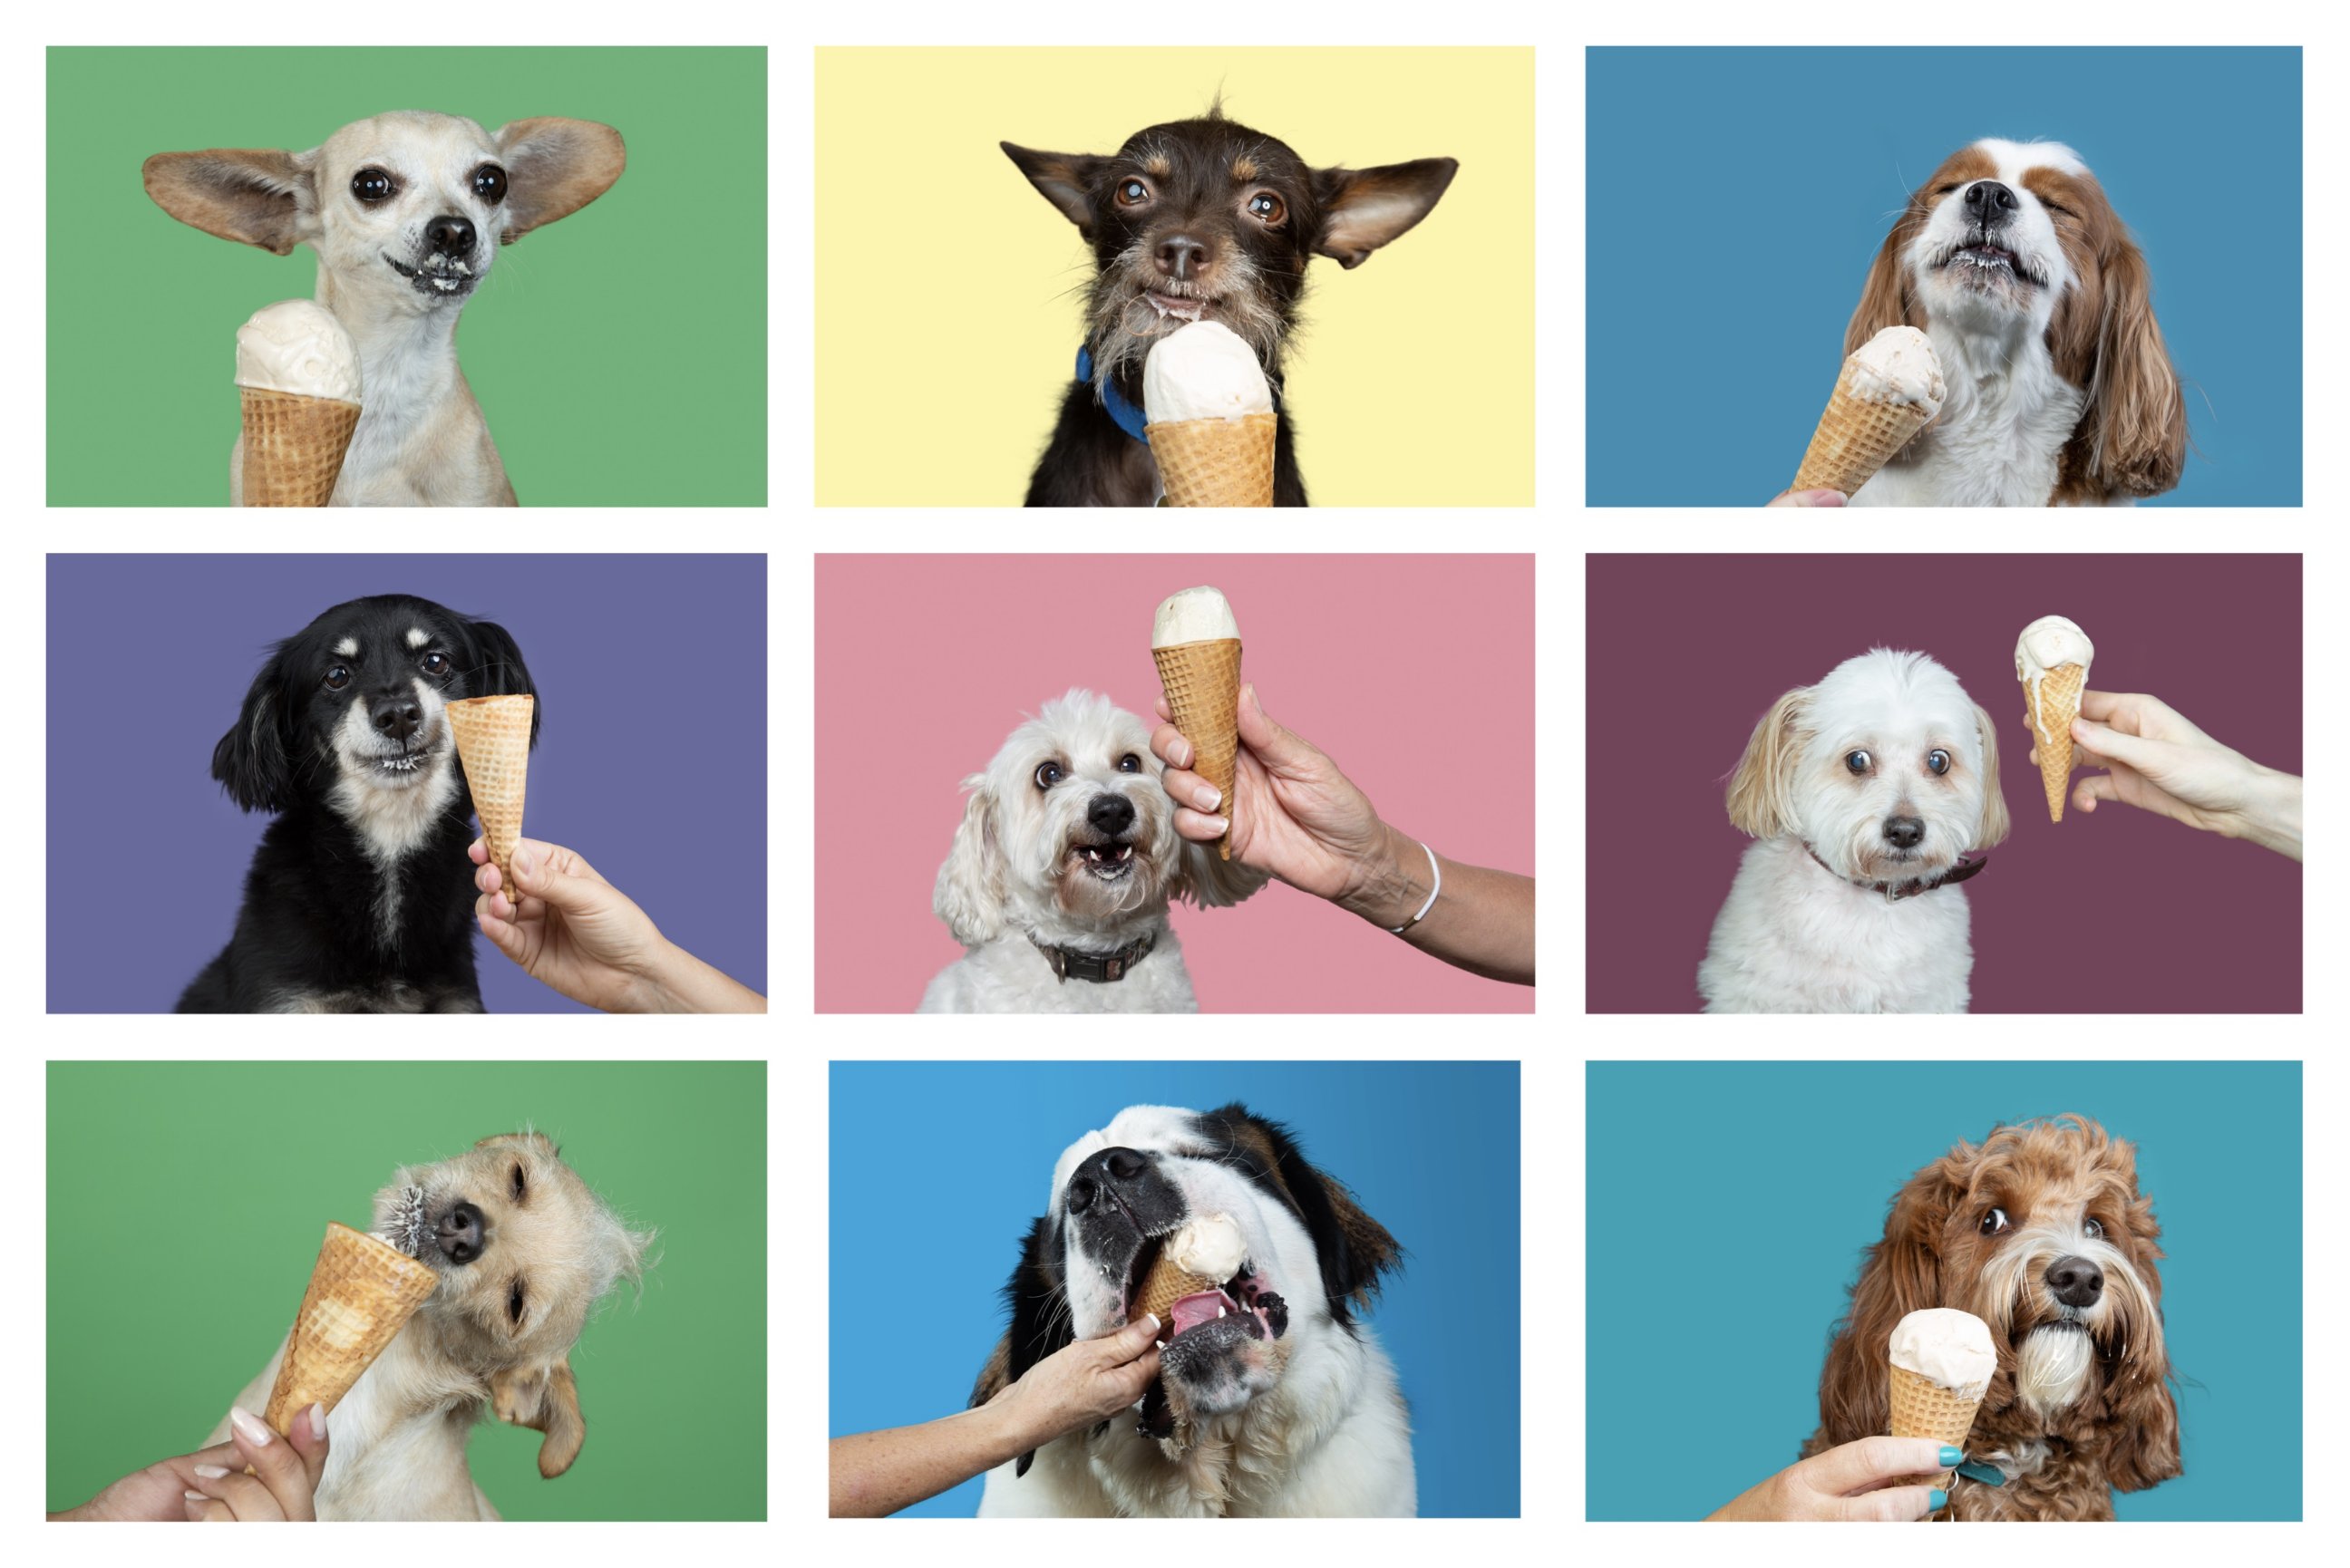 Wagging Tails Ice Cream Social - Saturday, September 23rd!